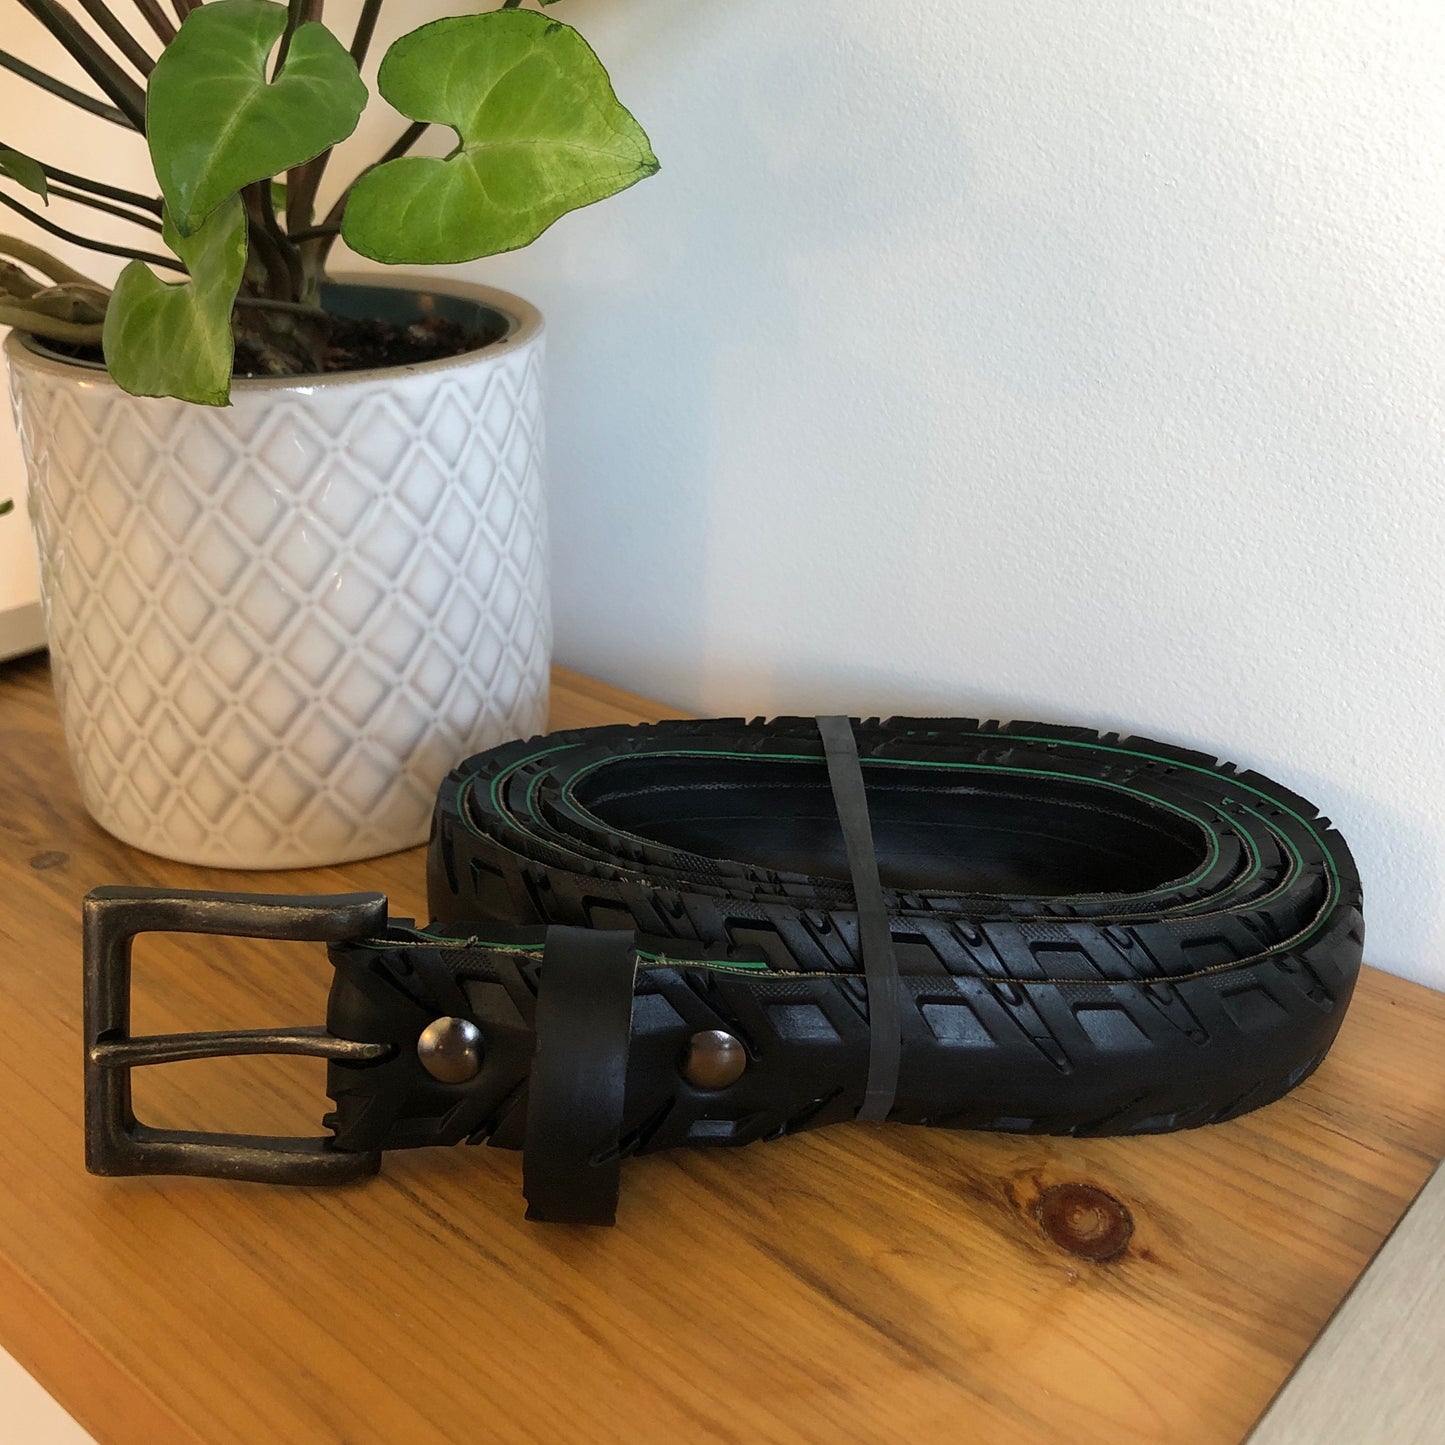 2218 - Recycled Bicycle Tire Belt: Green pin strip